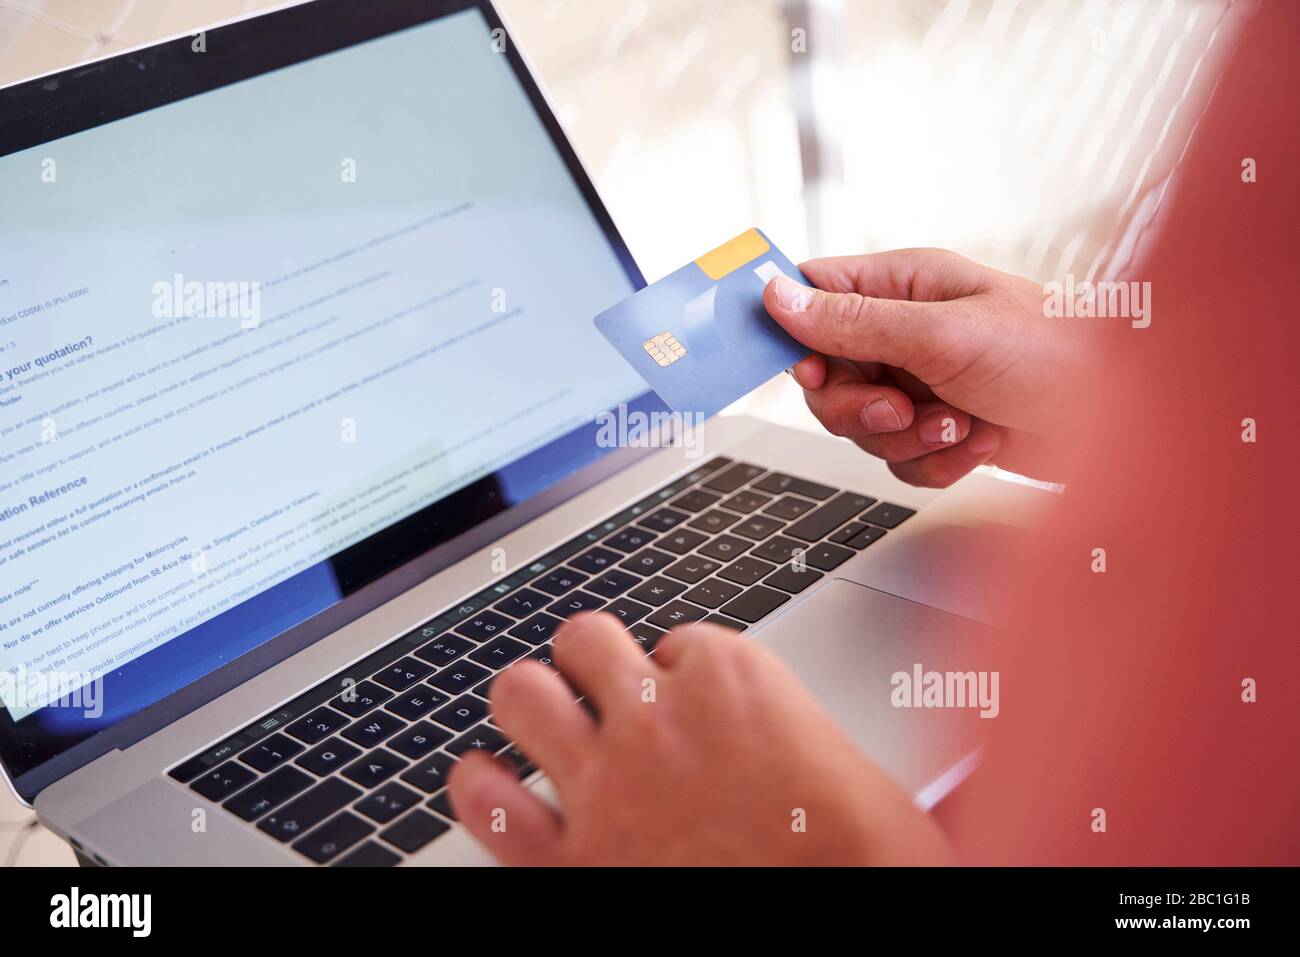 Man using laptop and holding credit card, close-up Banque D'Images